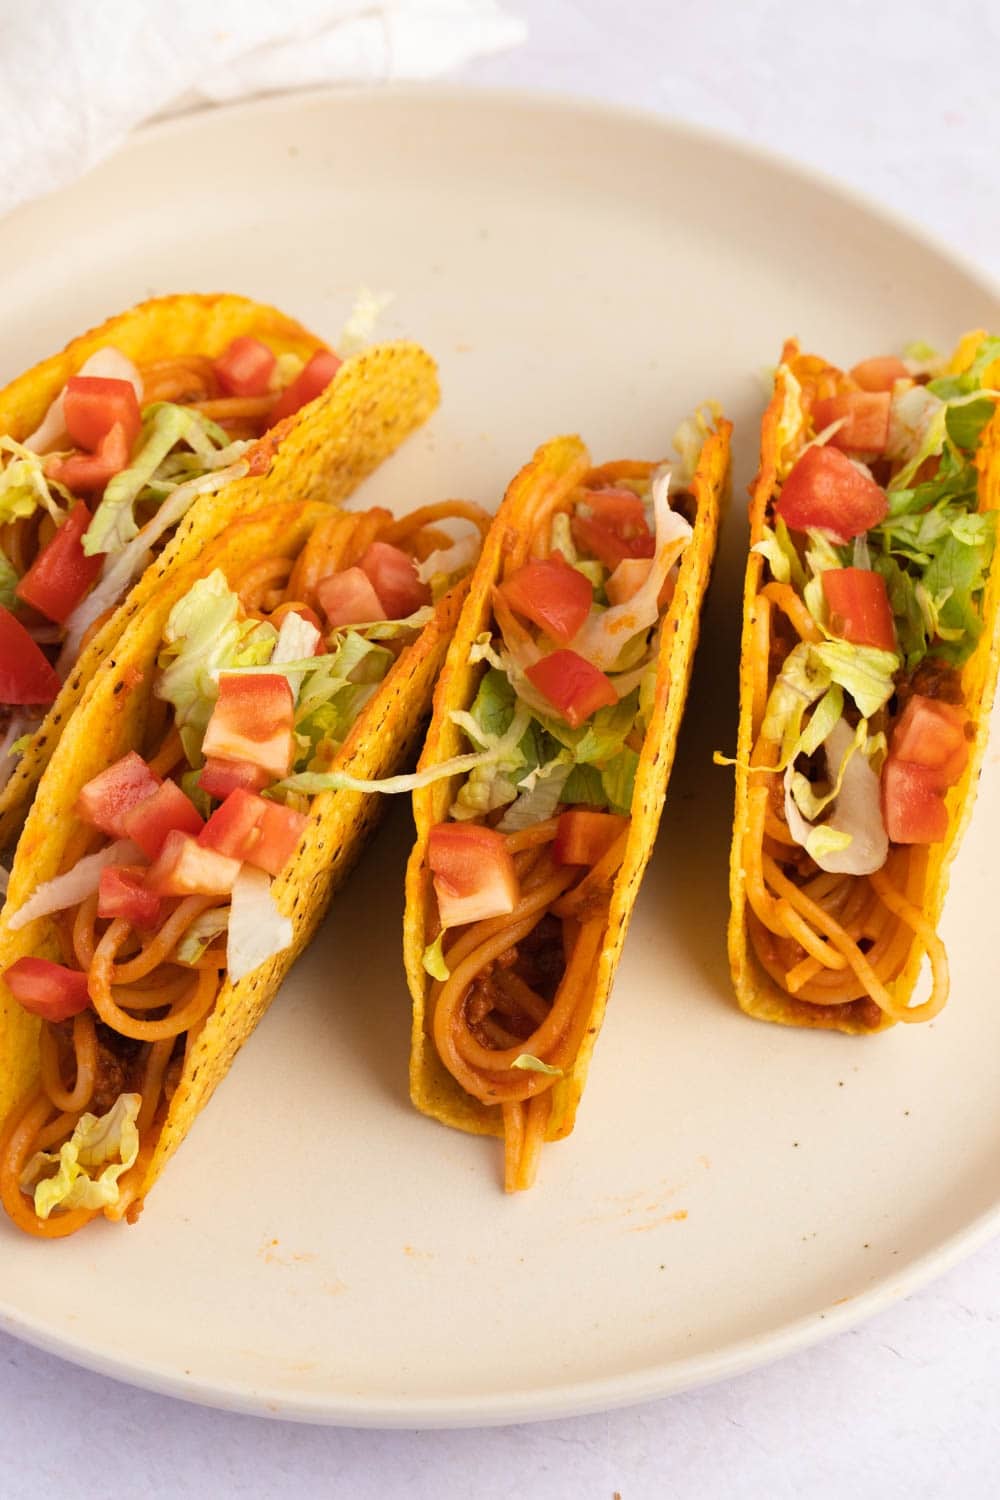 Spaghetti Tacos Made From Spaghetti Served on Taco Shells Garnished With Sliced Tomatoes, White Onions and Lettuce